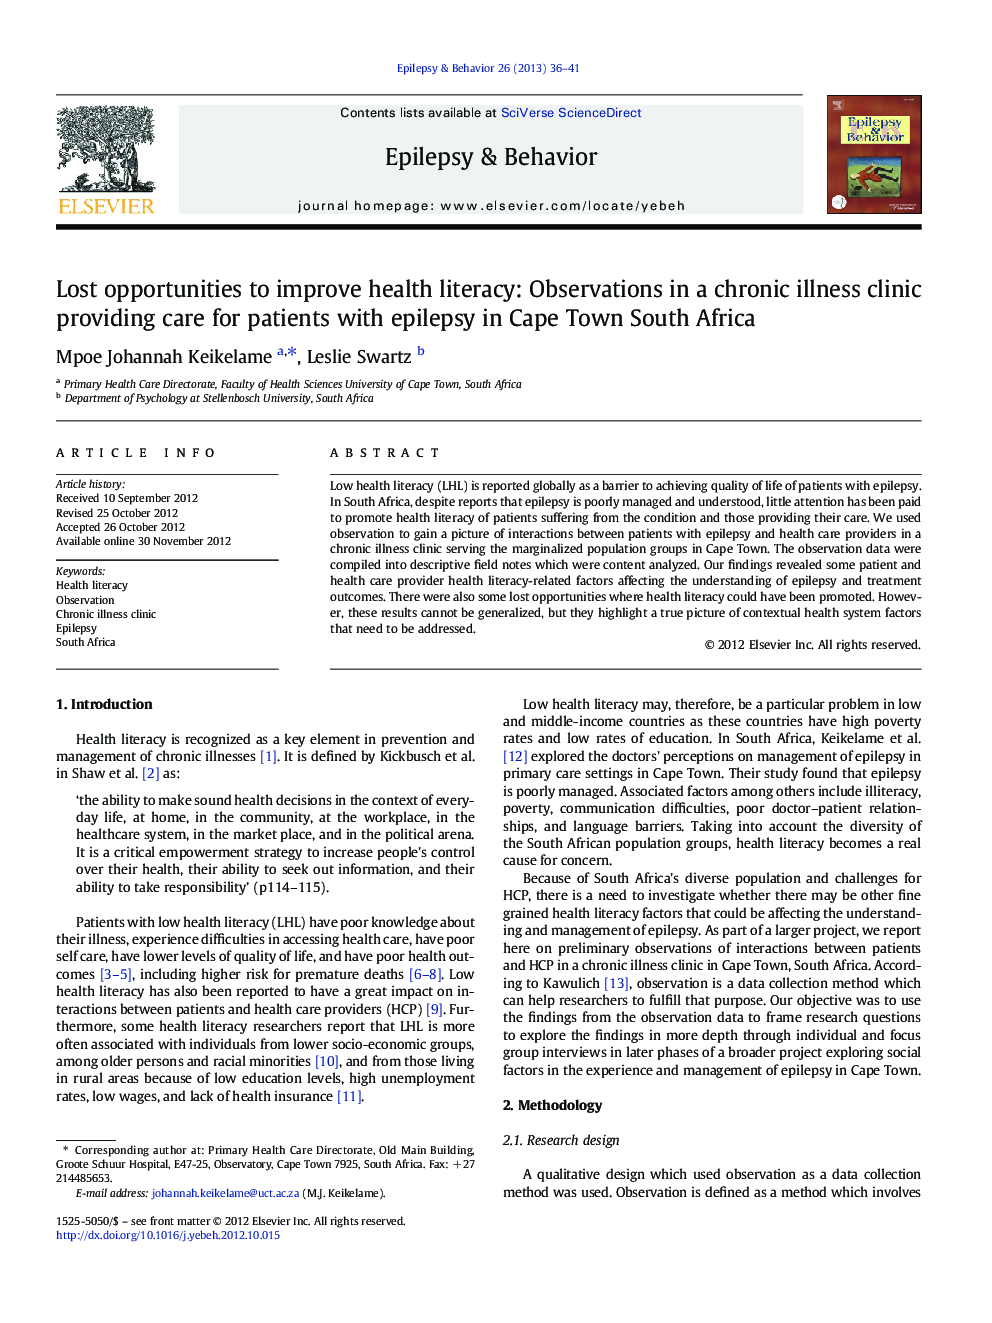 Lost opportunities to improve health literacy: Observations in a chronic illness clinic providing care for patients with epilepsy in Cape Town South Africa